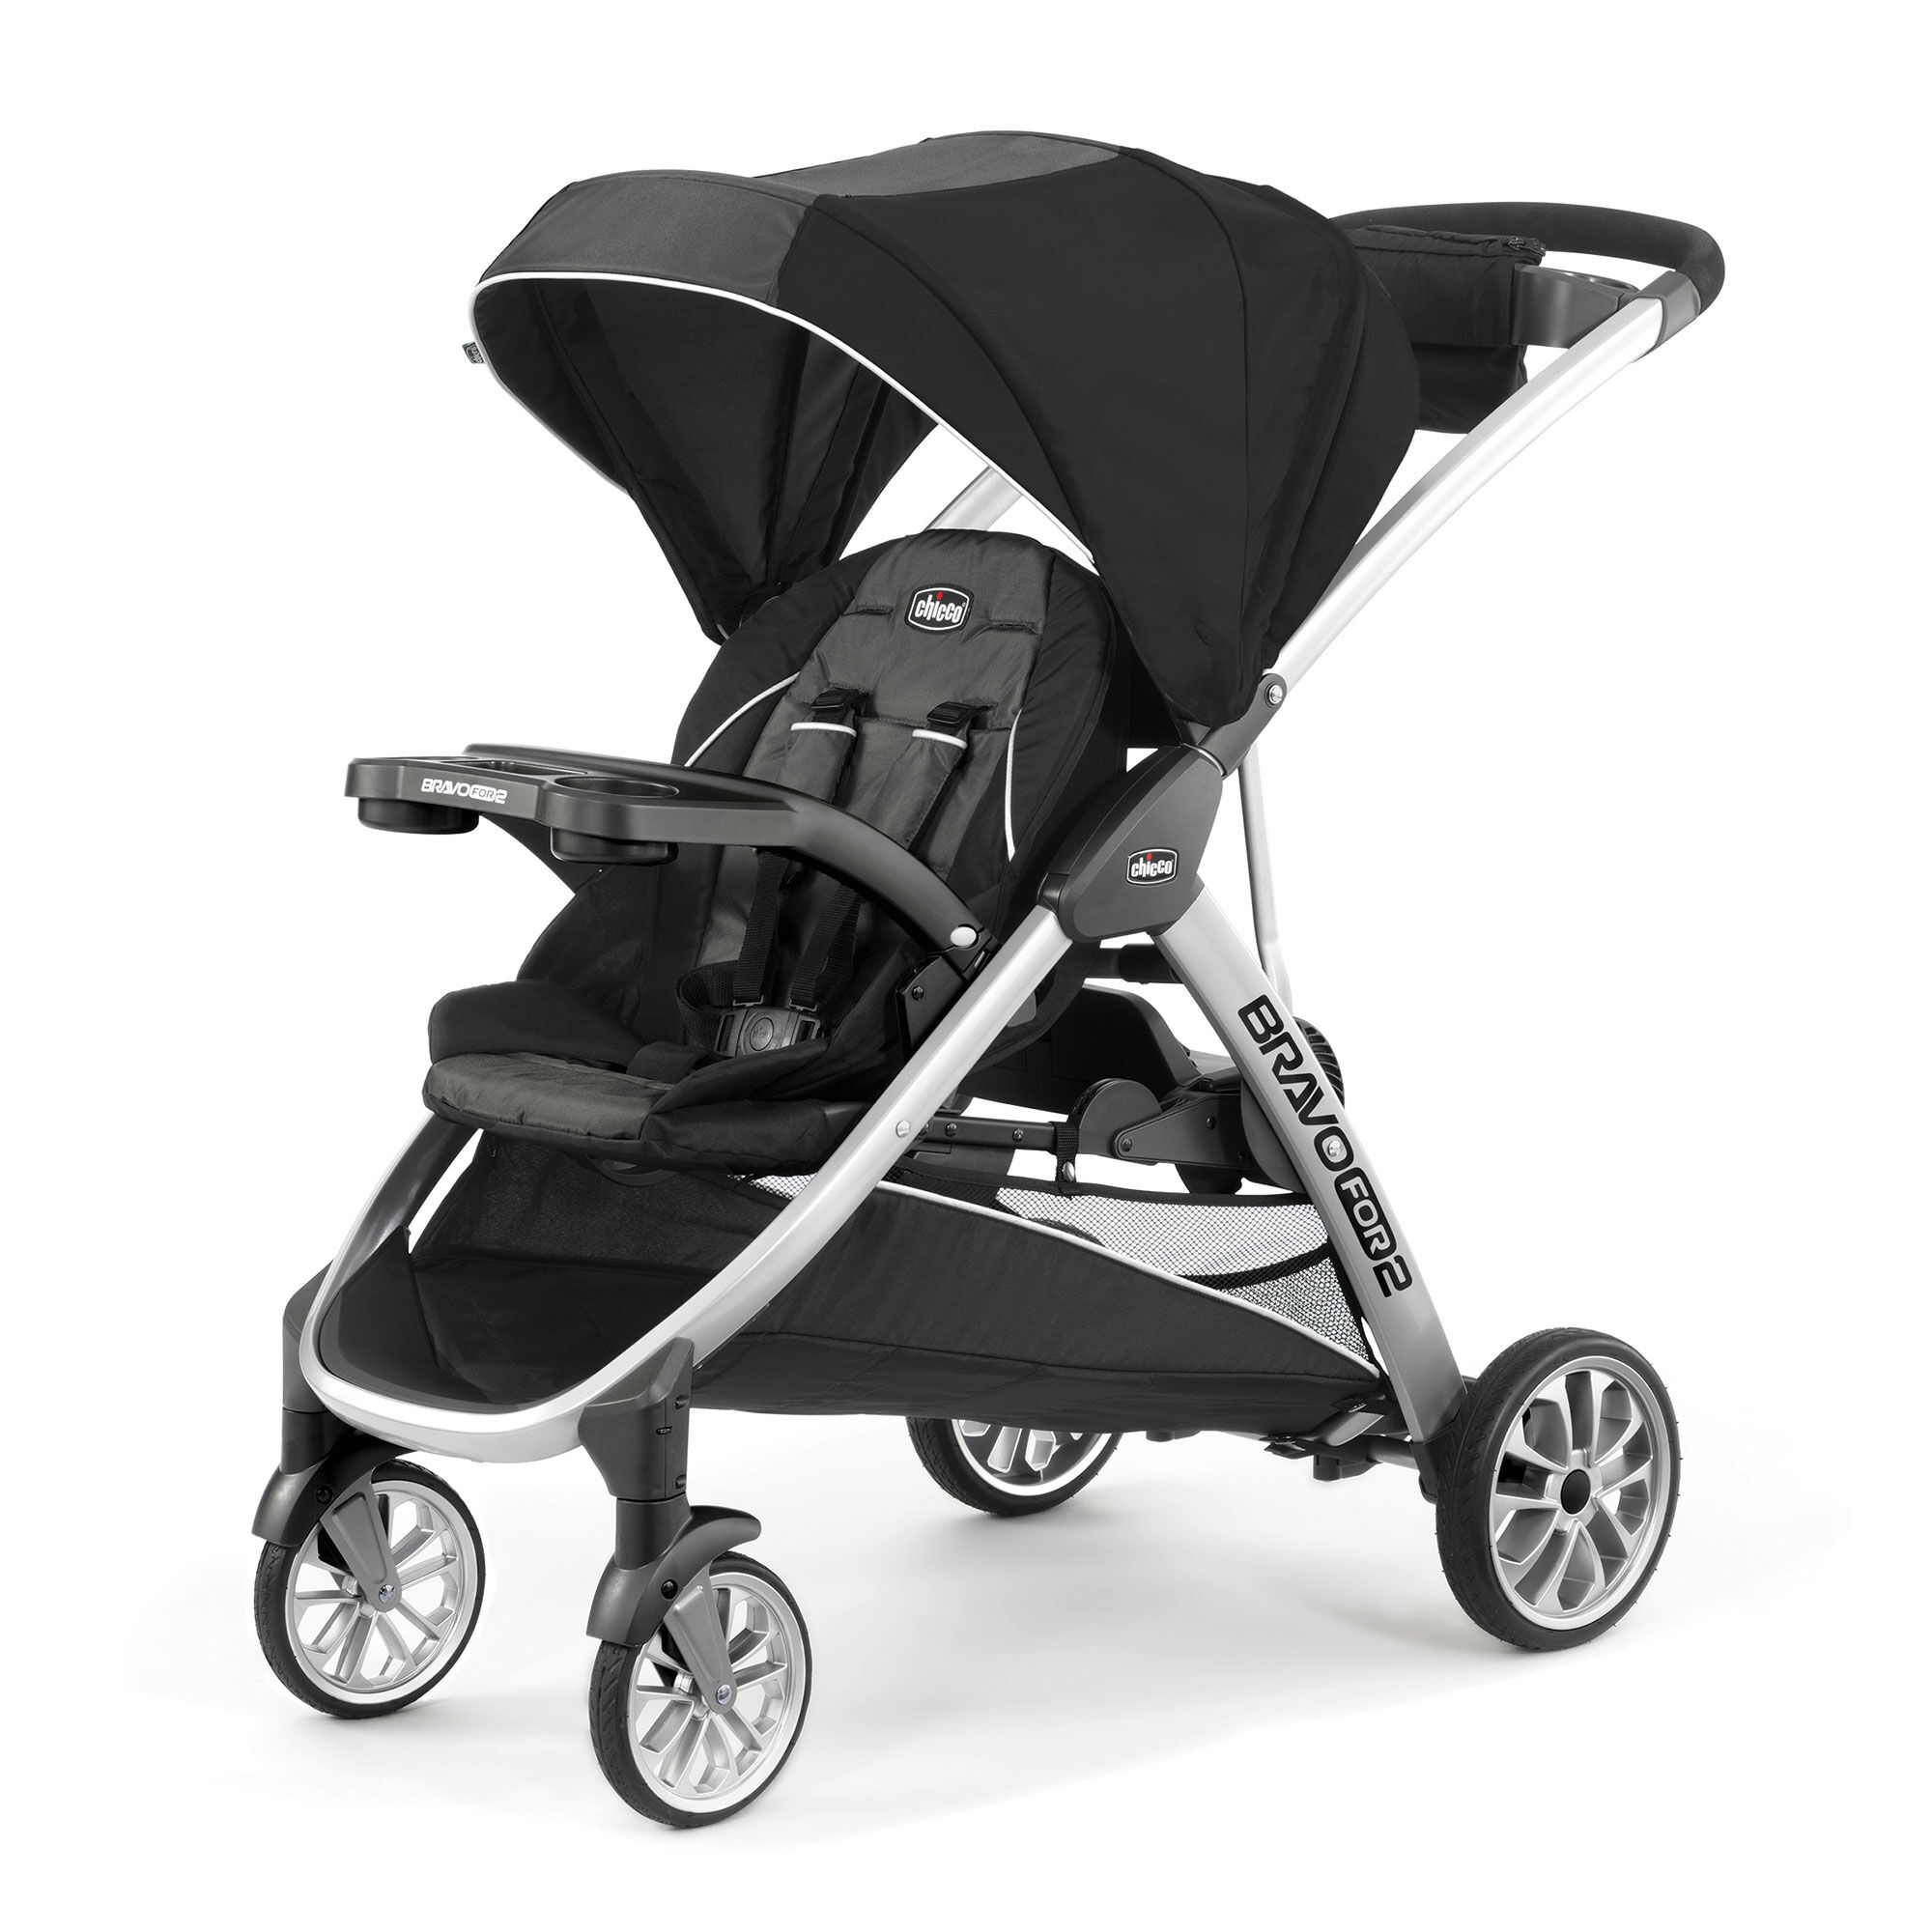 https://www.chiccousa.com/dw/image/v2/AAMT_PRD/on/demandware.static/-/Sites-chicco_catalog/default/dw32ff7006/images/products/Gear/bravofor2/chicco-bravofor2-double-stroller-iron.jpg?sw=2000&sh=2000&sm=fit